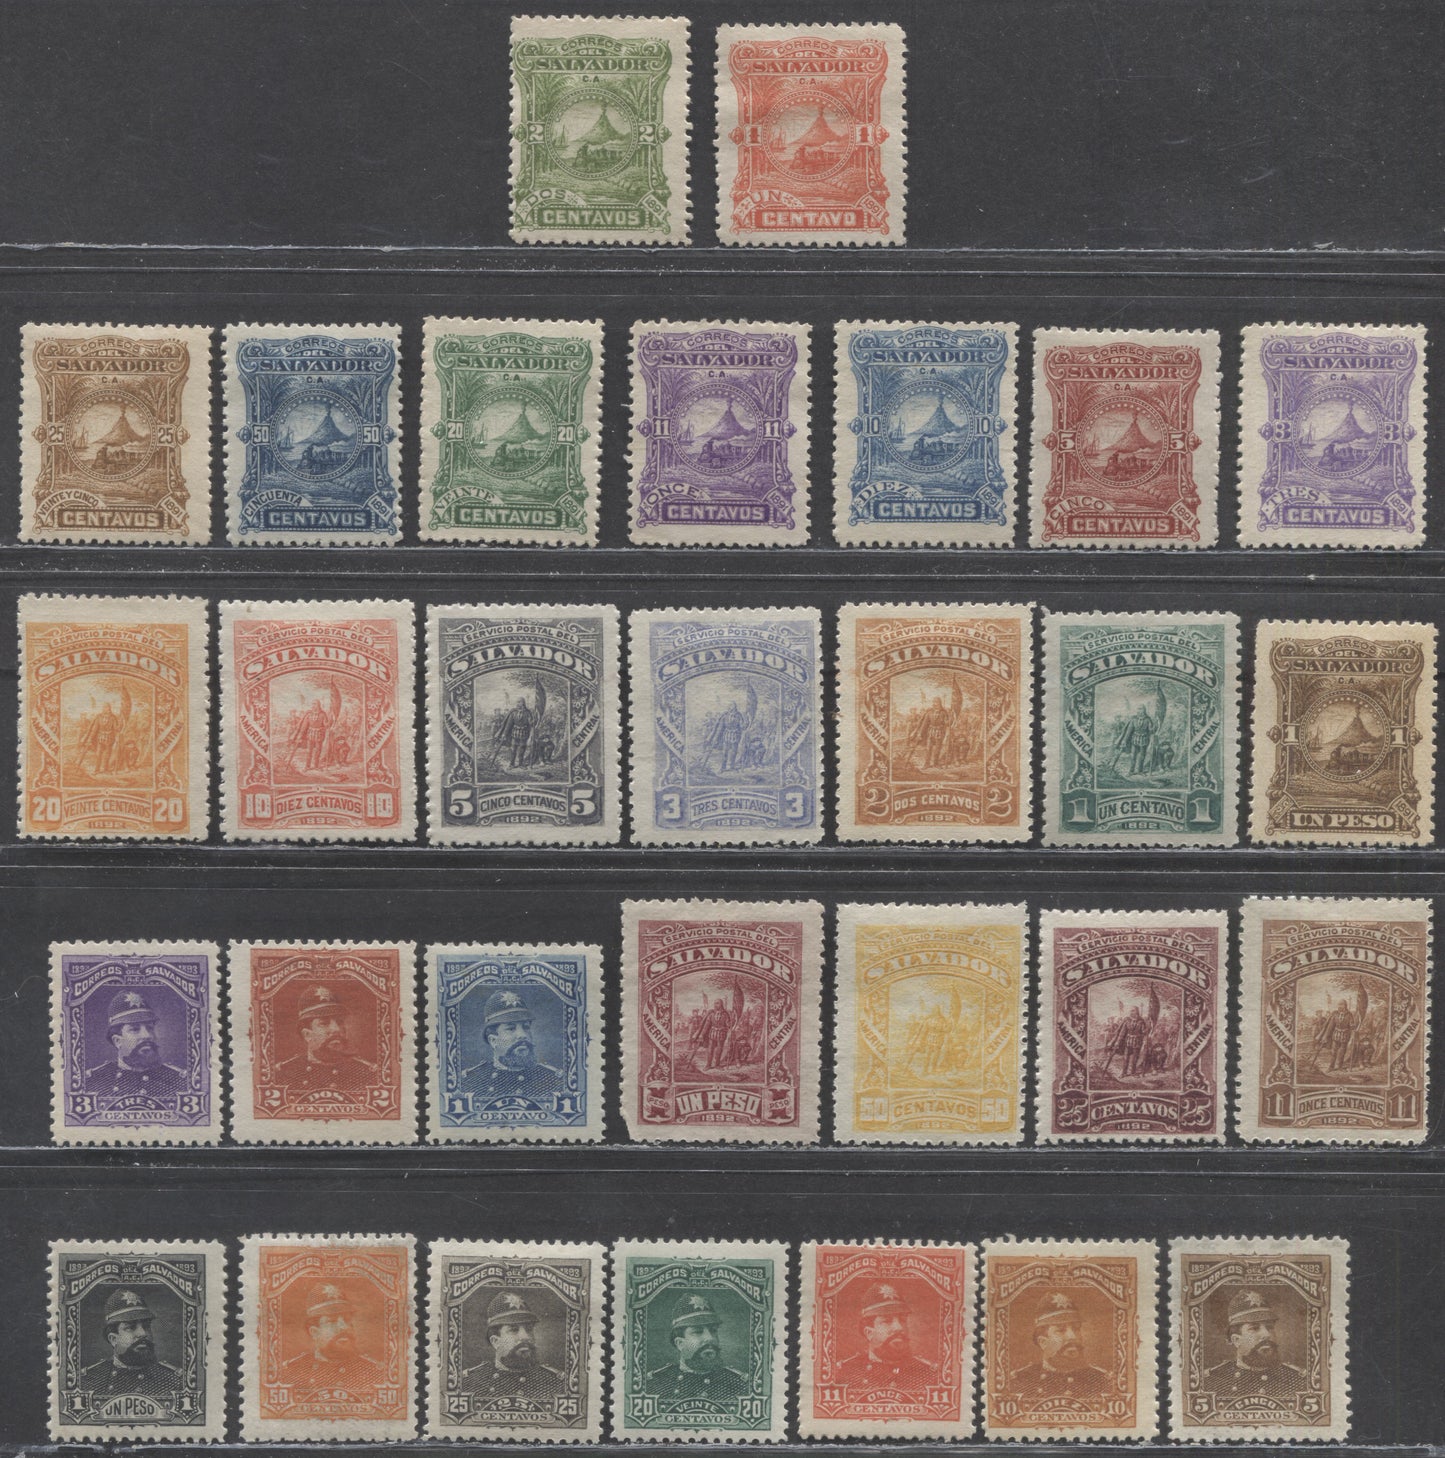 Lot 151 El Salvador SC#47/85 1891-1893 Seebeeks Issue, An Assortment Of F/VFOG Singles, Click on Listing to See ALL Pictures, 2022 Scott Classic Cat. $17.75 USD